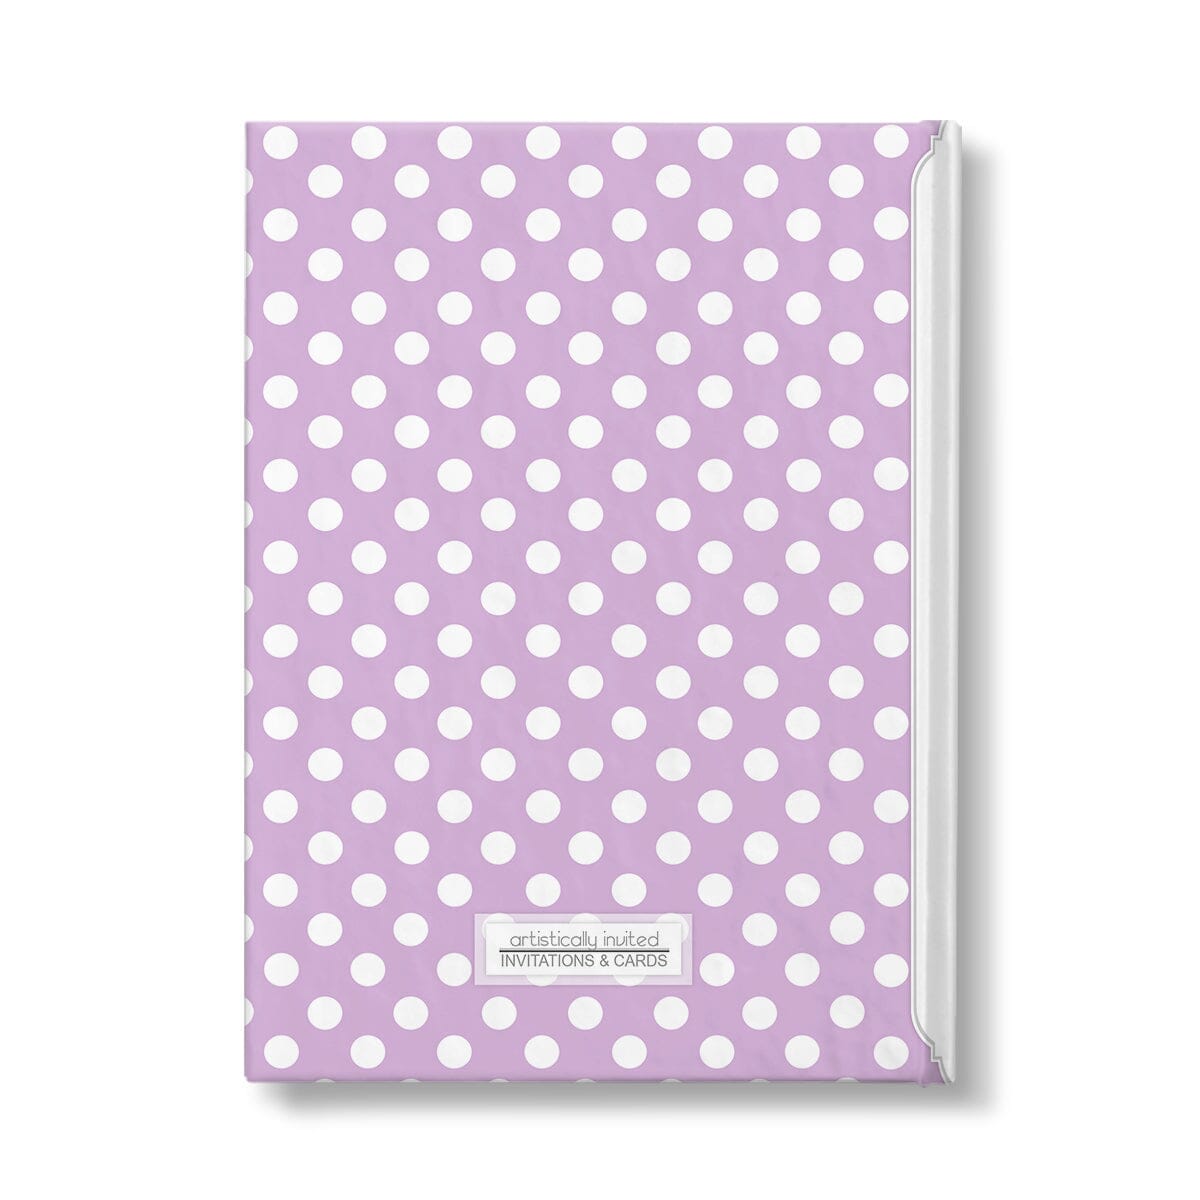 Personalized Purple Polka Dot Journal at Artistically Invited. Back side of the book.